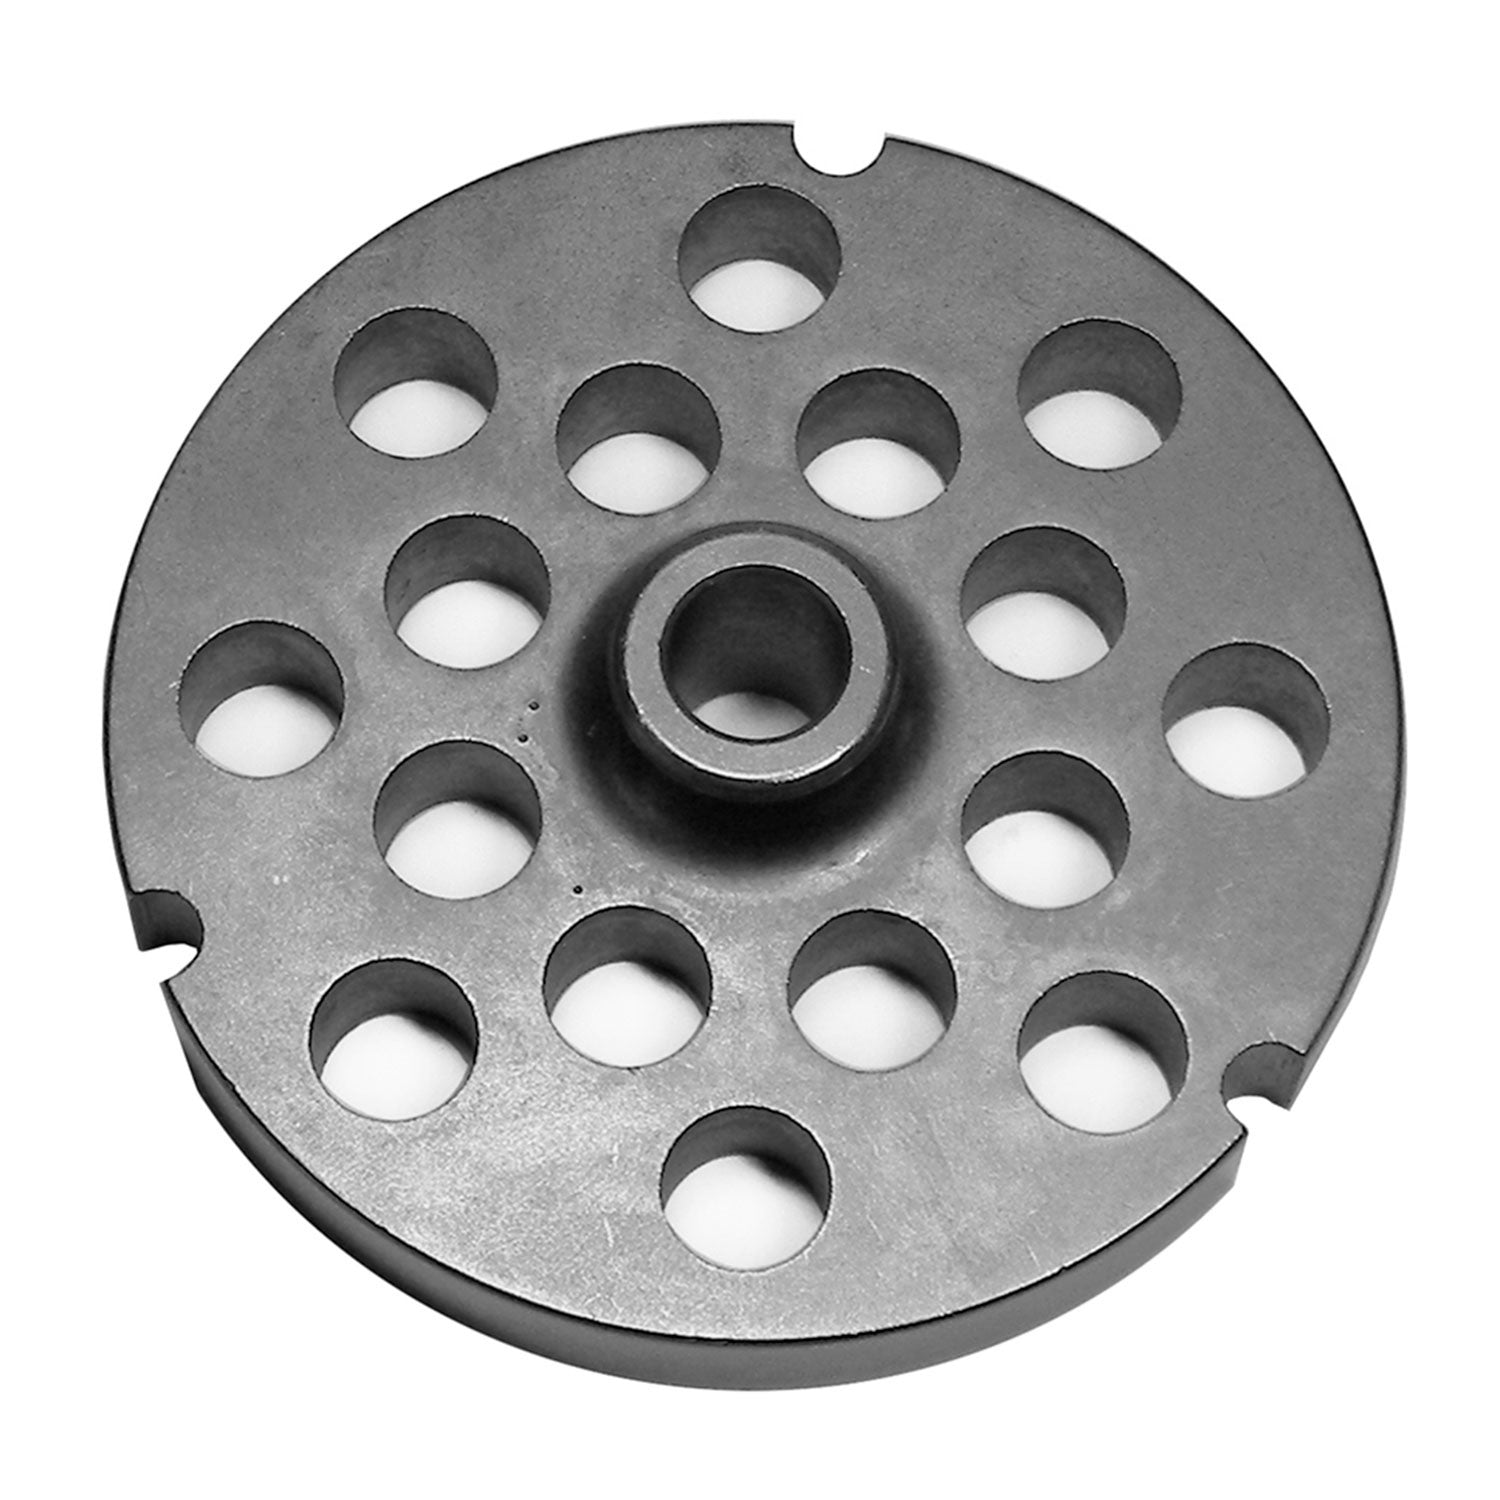 Size 32 PM Hubbed Meat Grinder Plate, 1/2